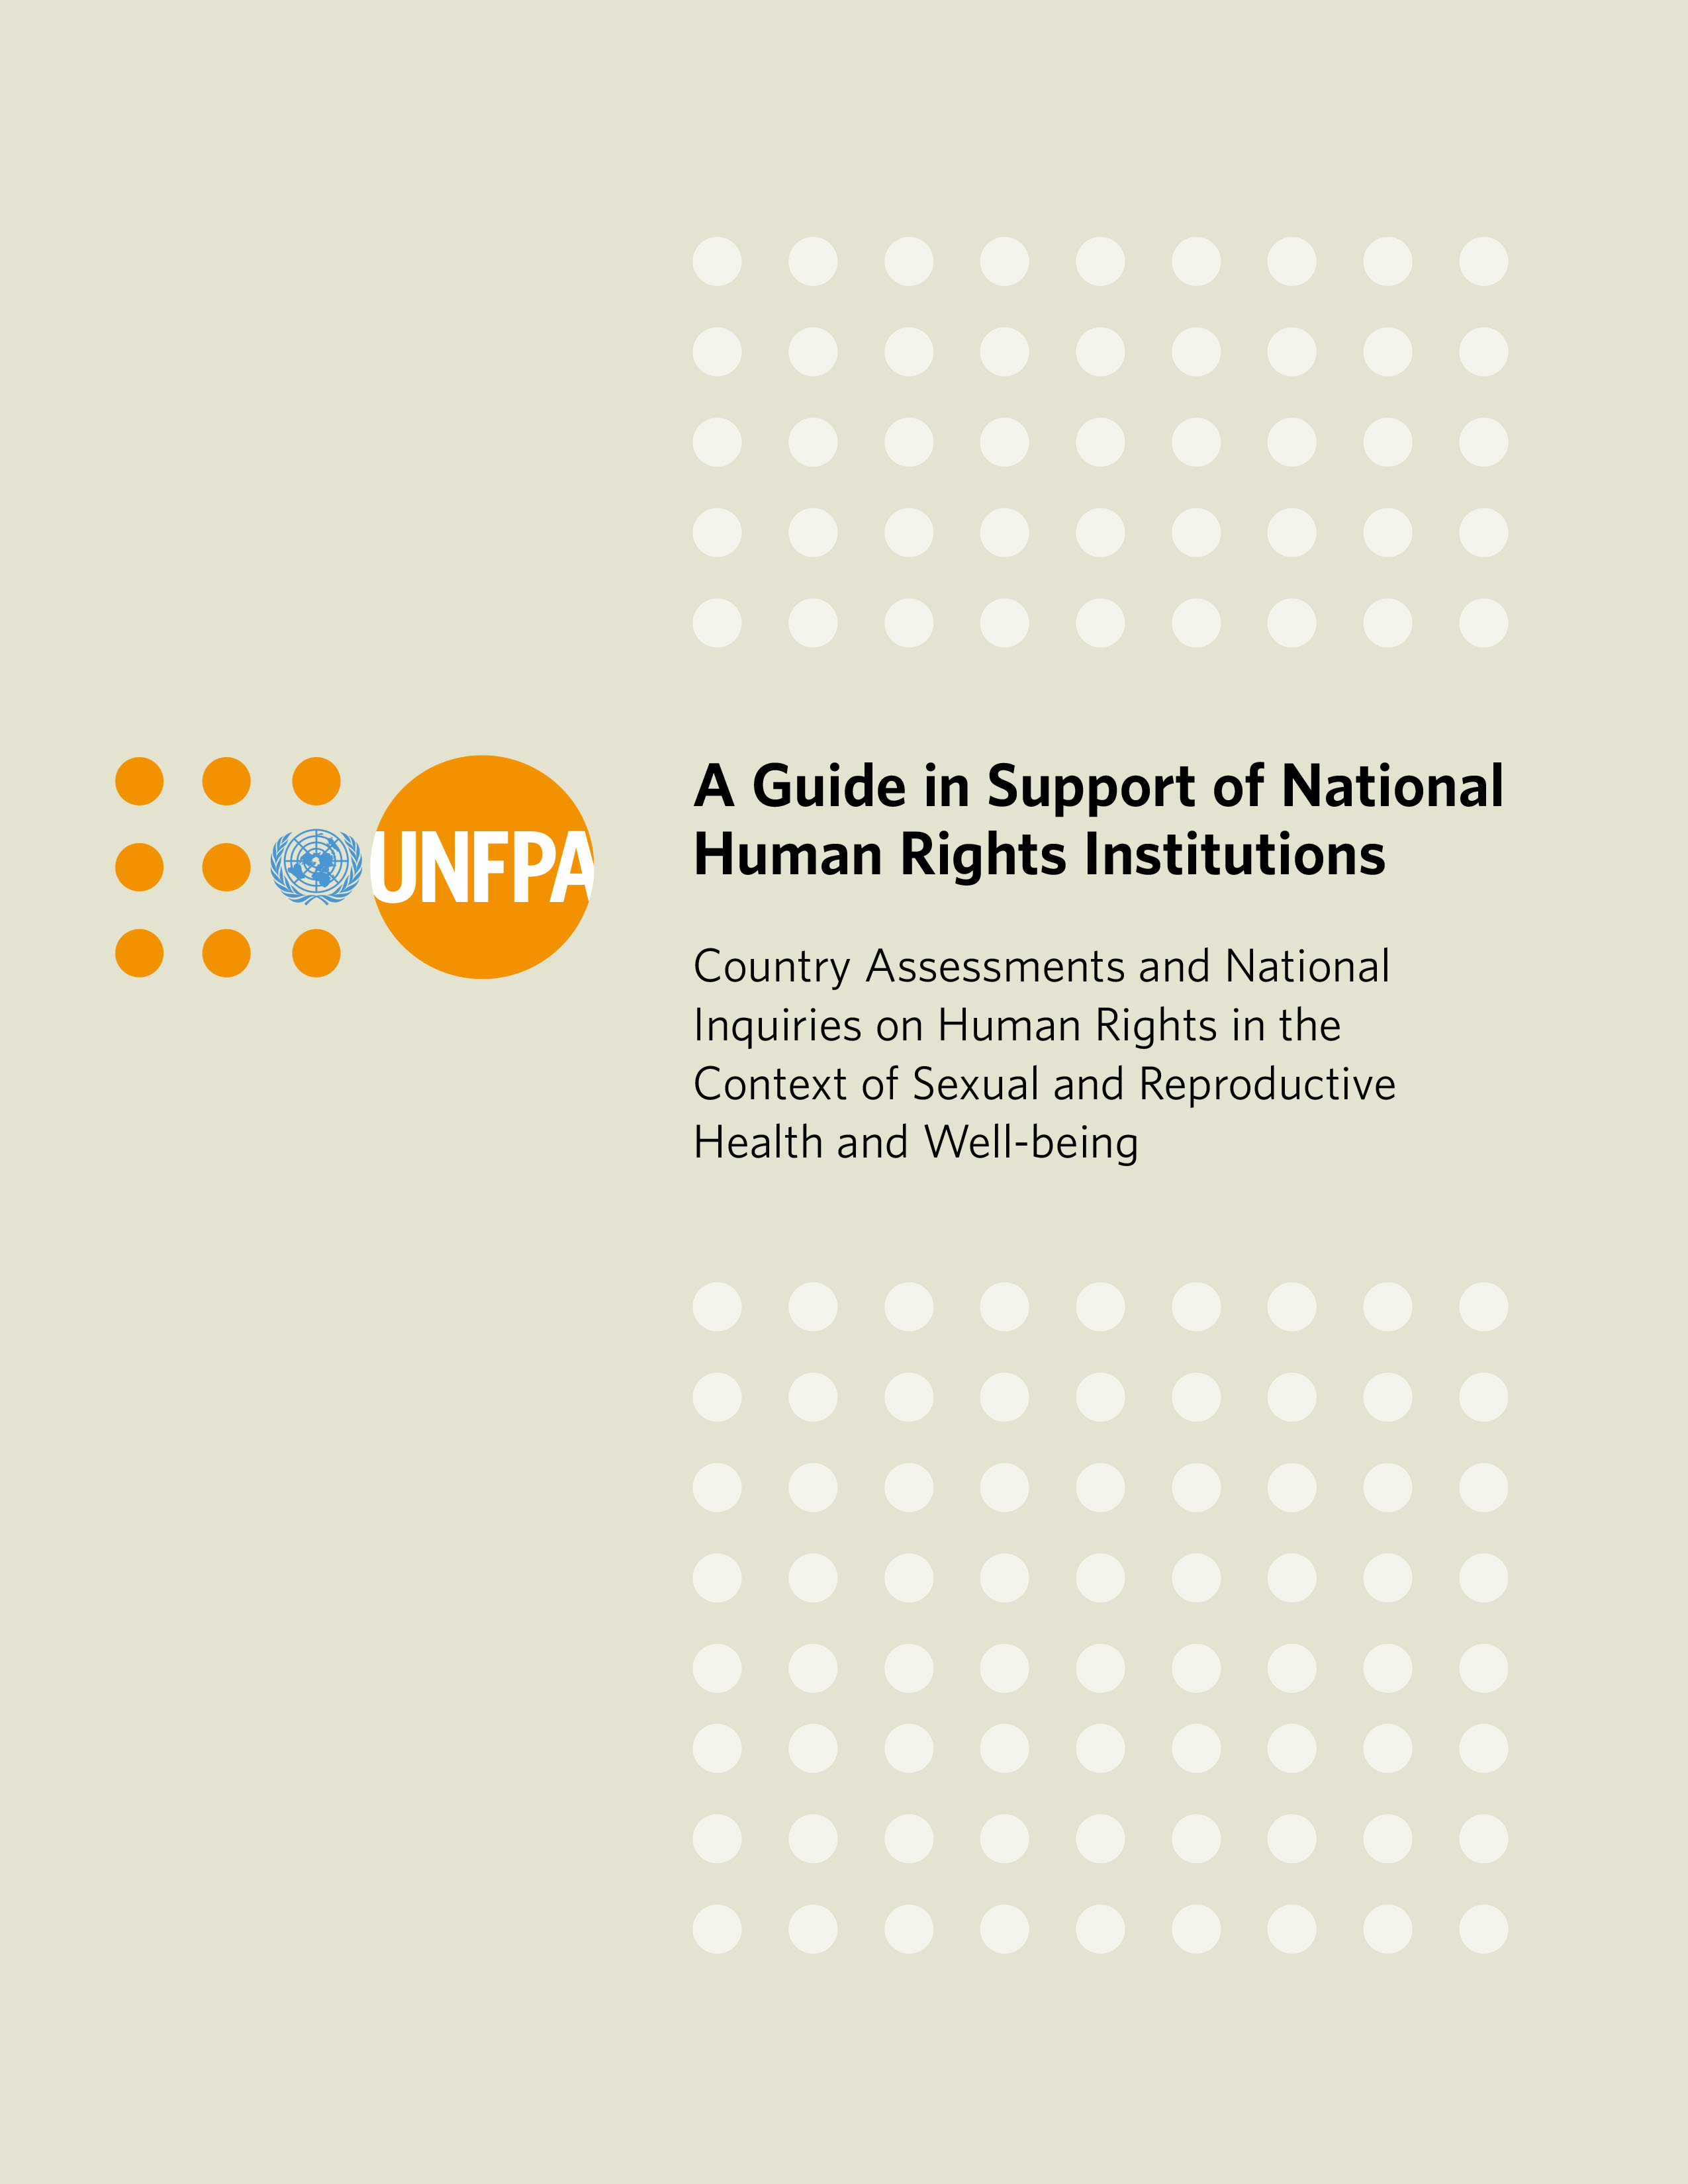 A Guide in Support of National Human Rights Institutions